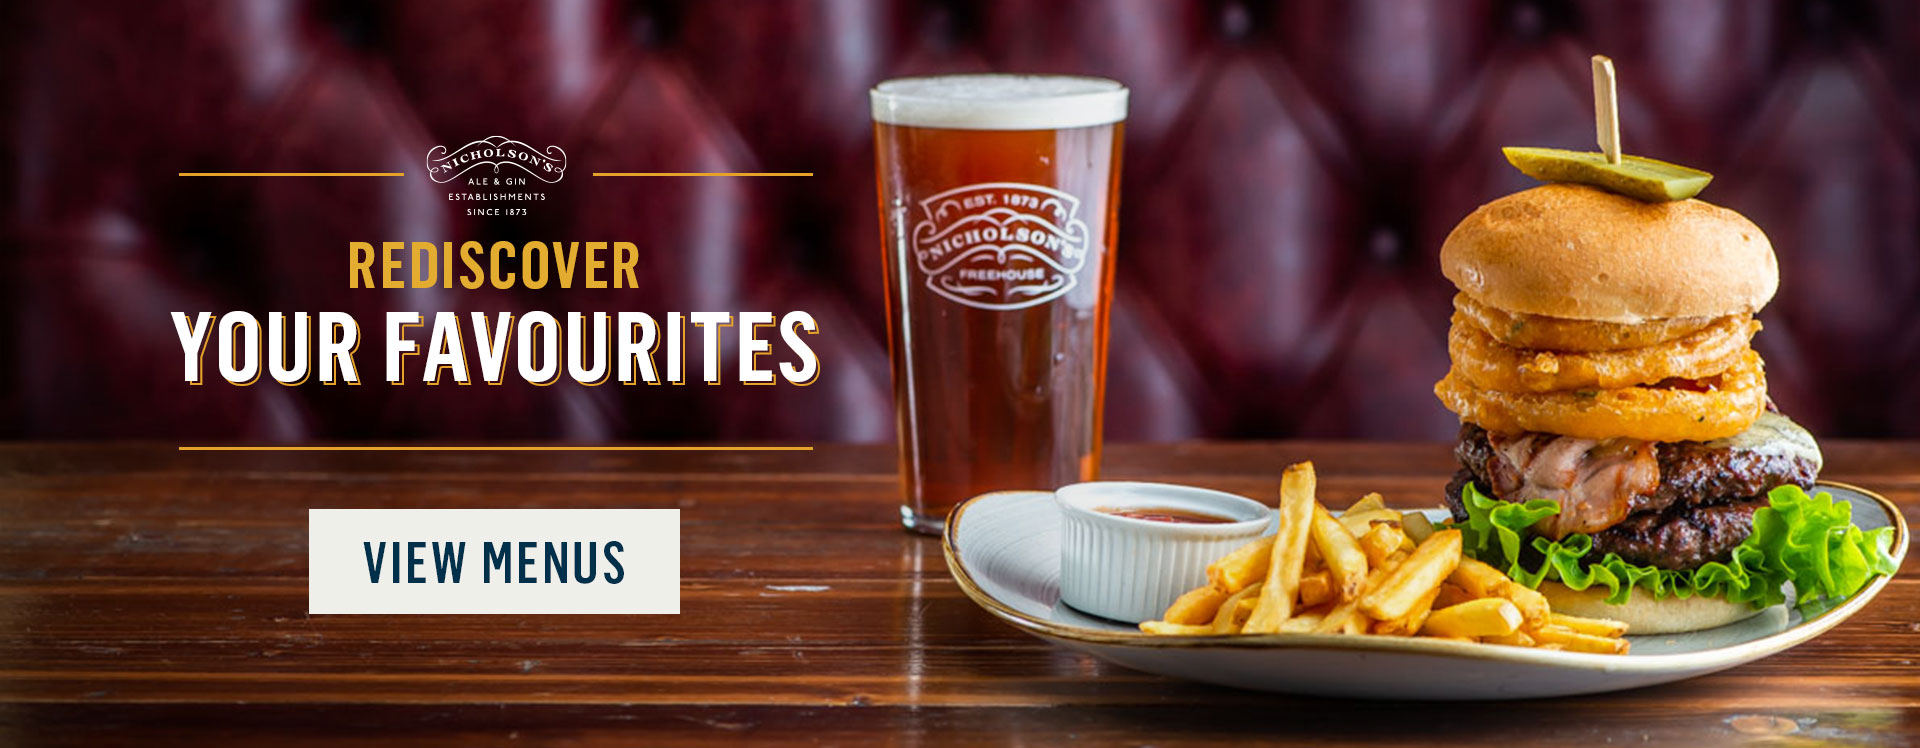 Rediscover your favourites at The Old Bell Tavern